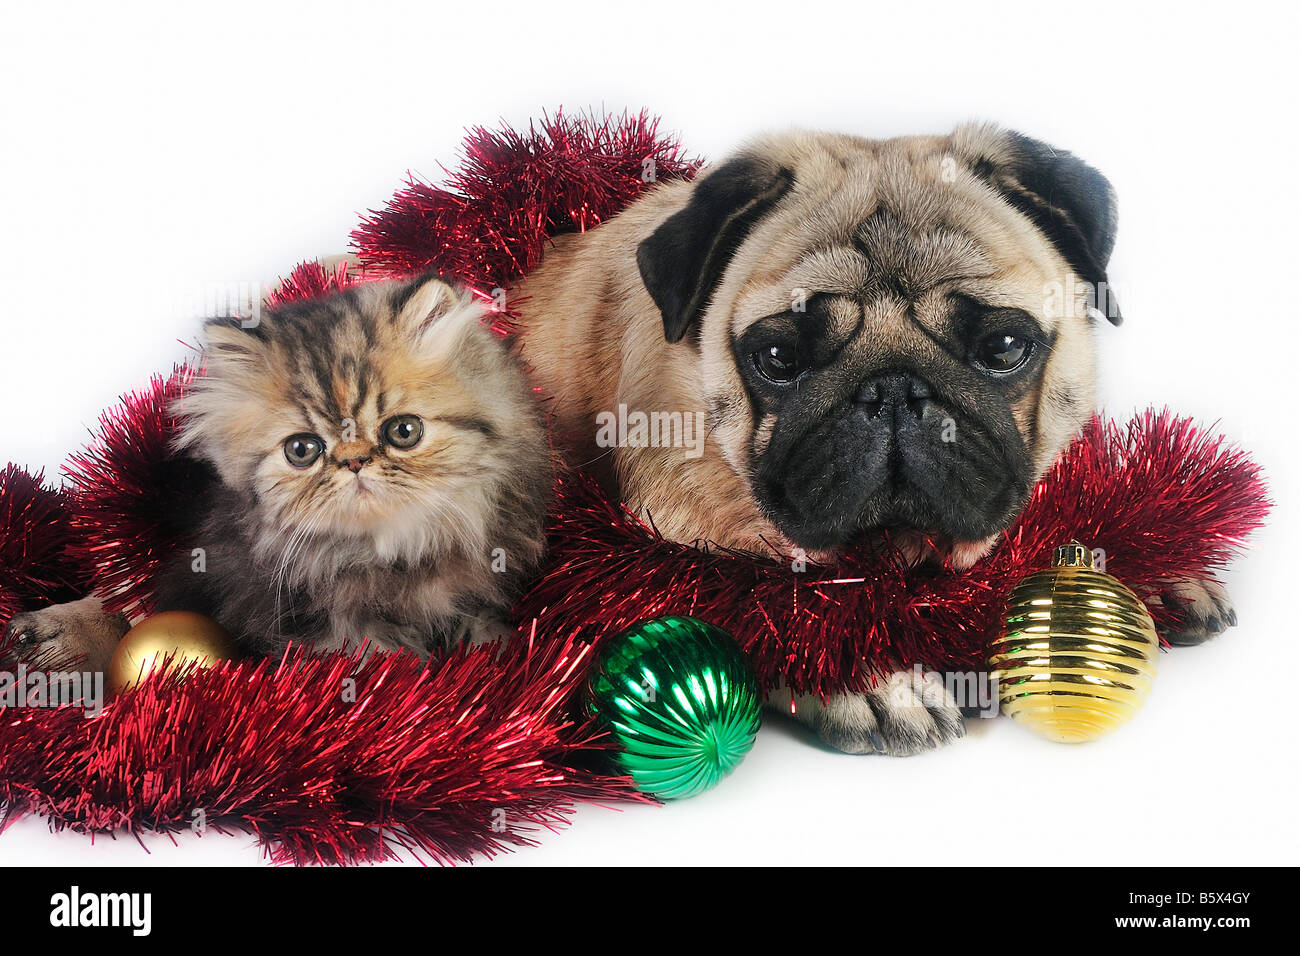 Pug dog with little Persian kitten surrounded by Christmas ornaments Stock Photo